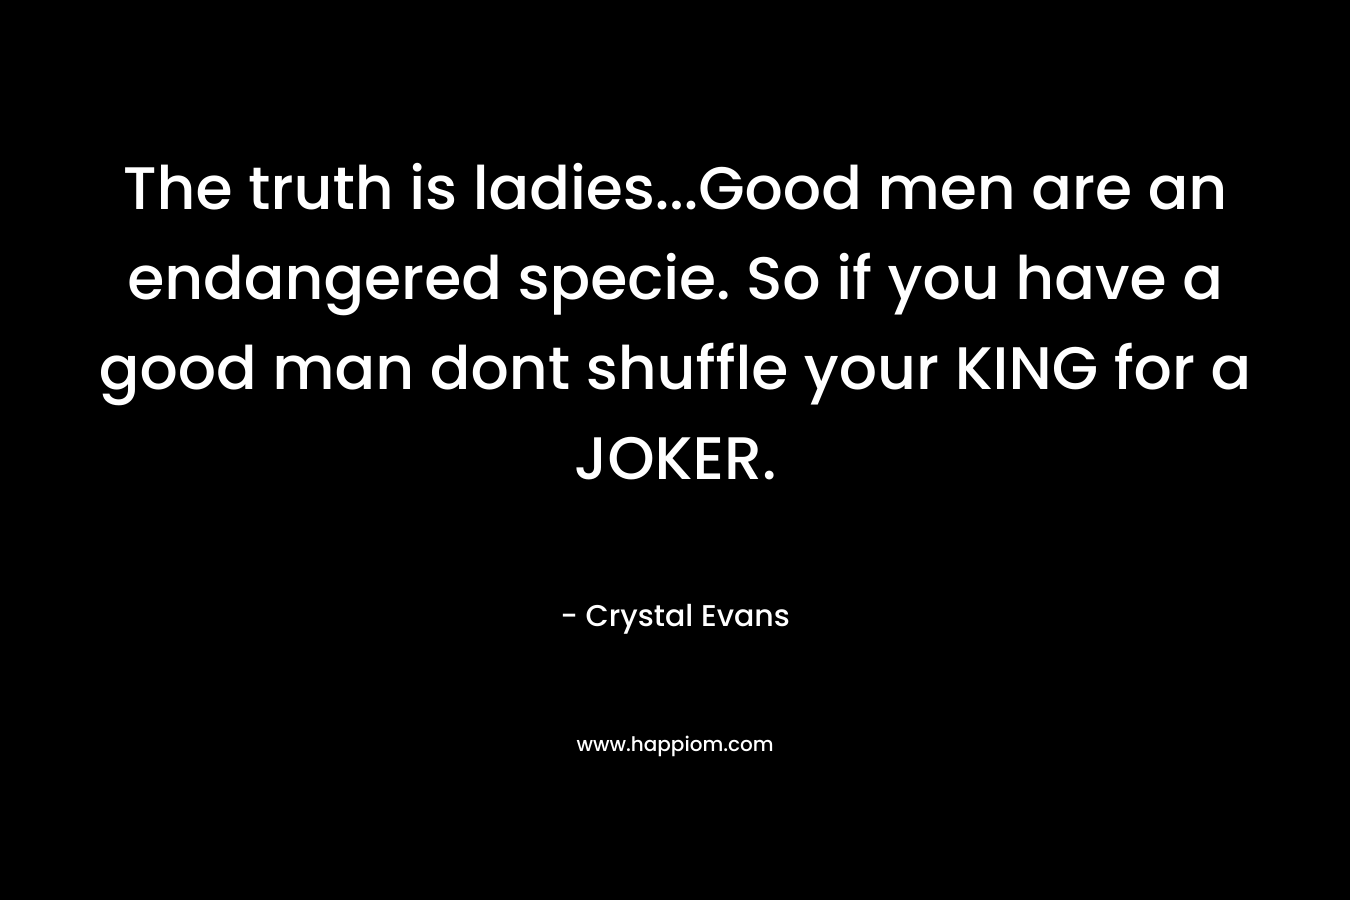 The truth is ladies...Good men are an endangered specie. So if you have a good man dont shuffle your KING for a JOKER.